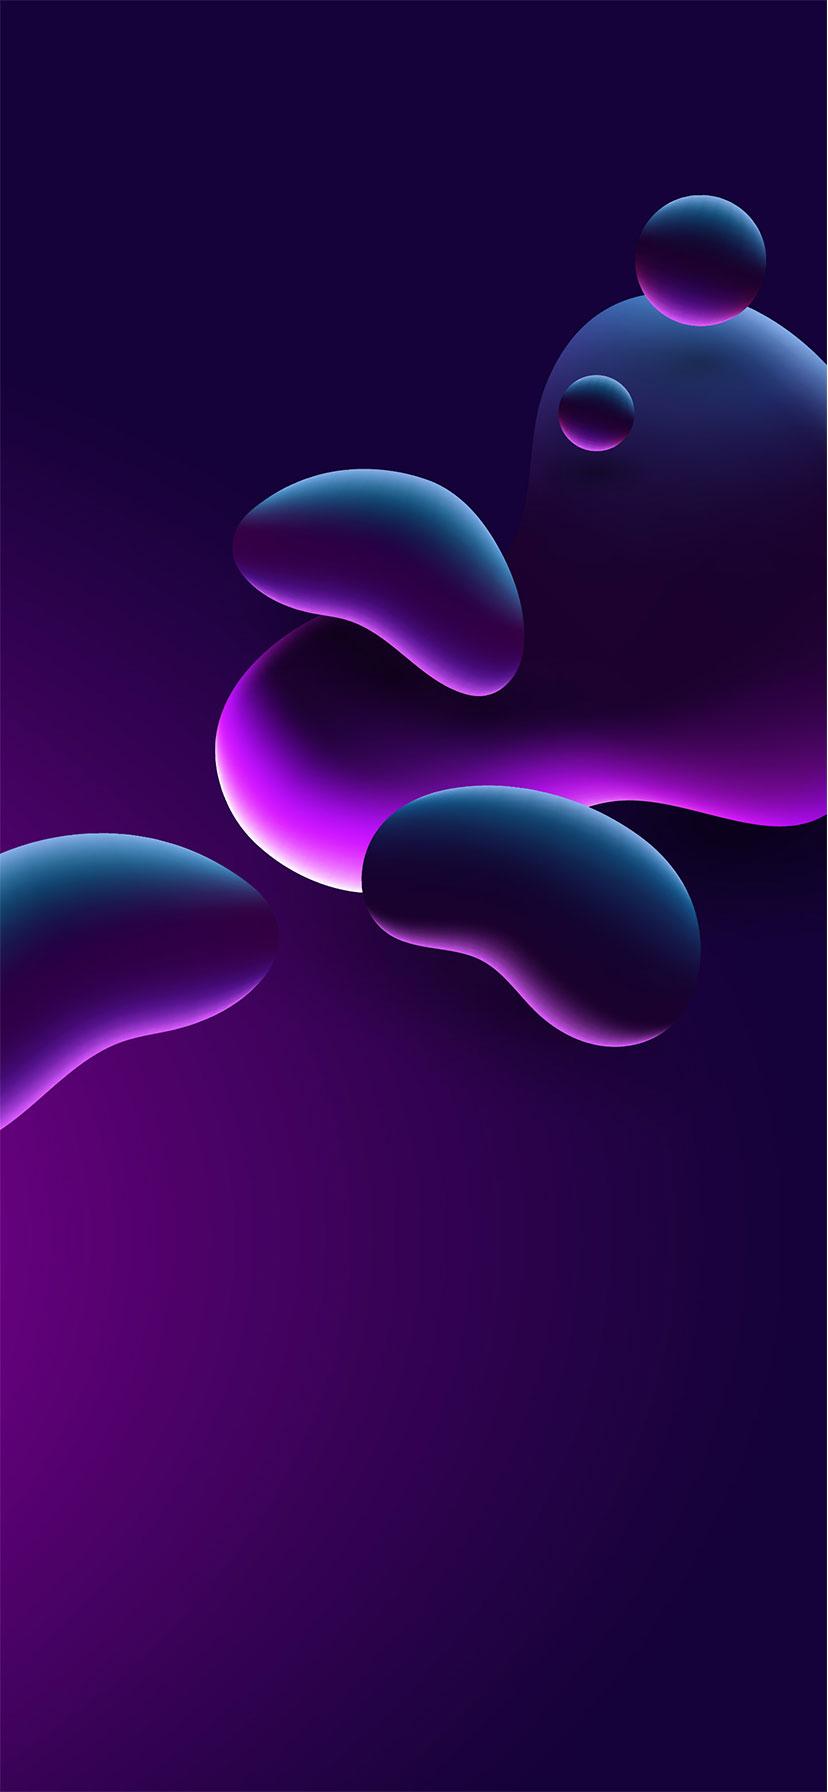 iOS 14 Wallpapers